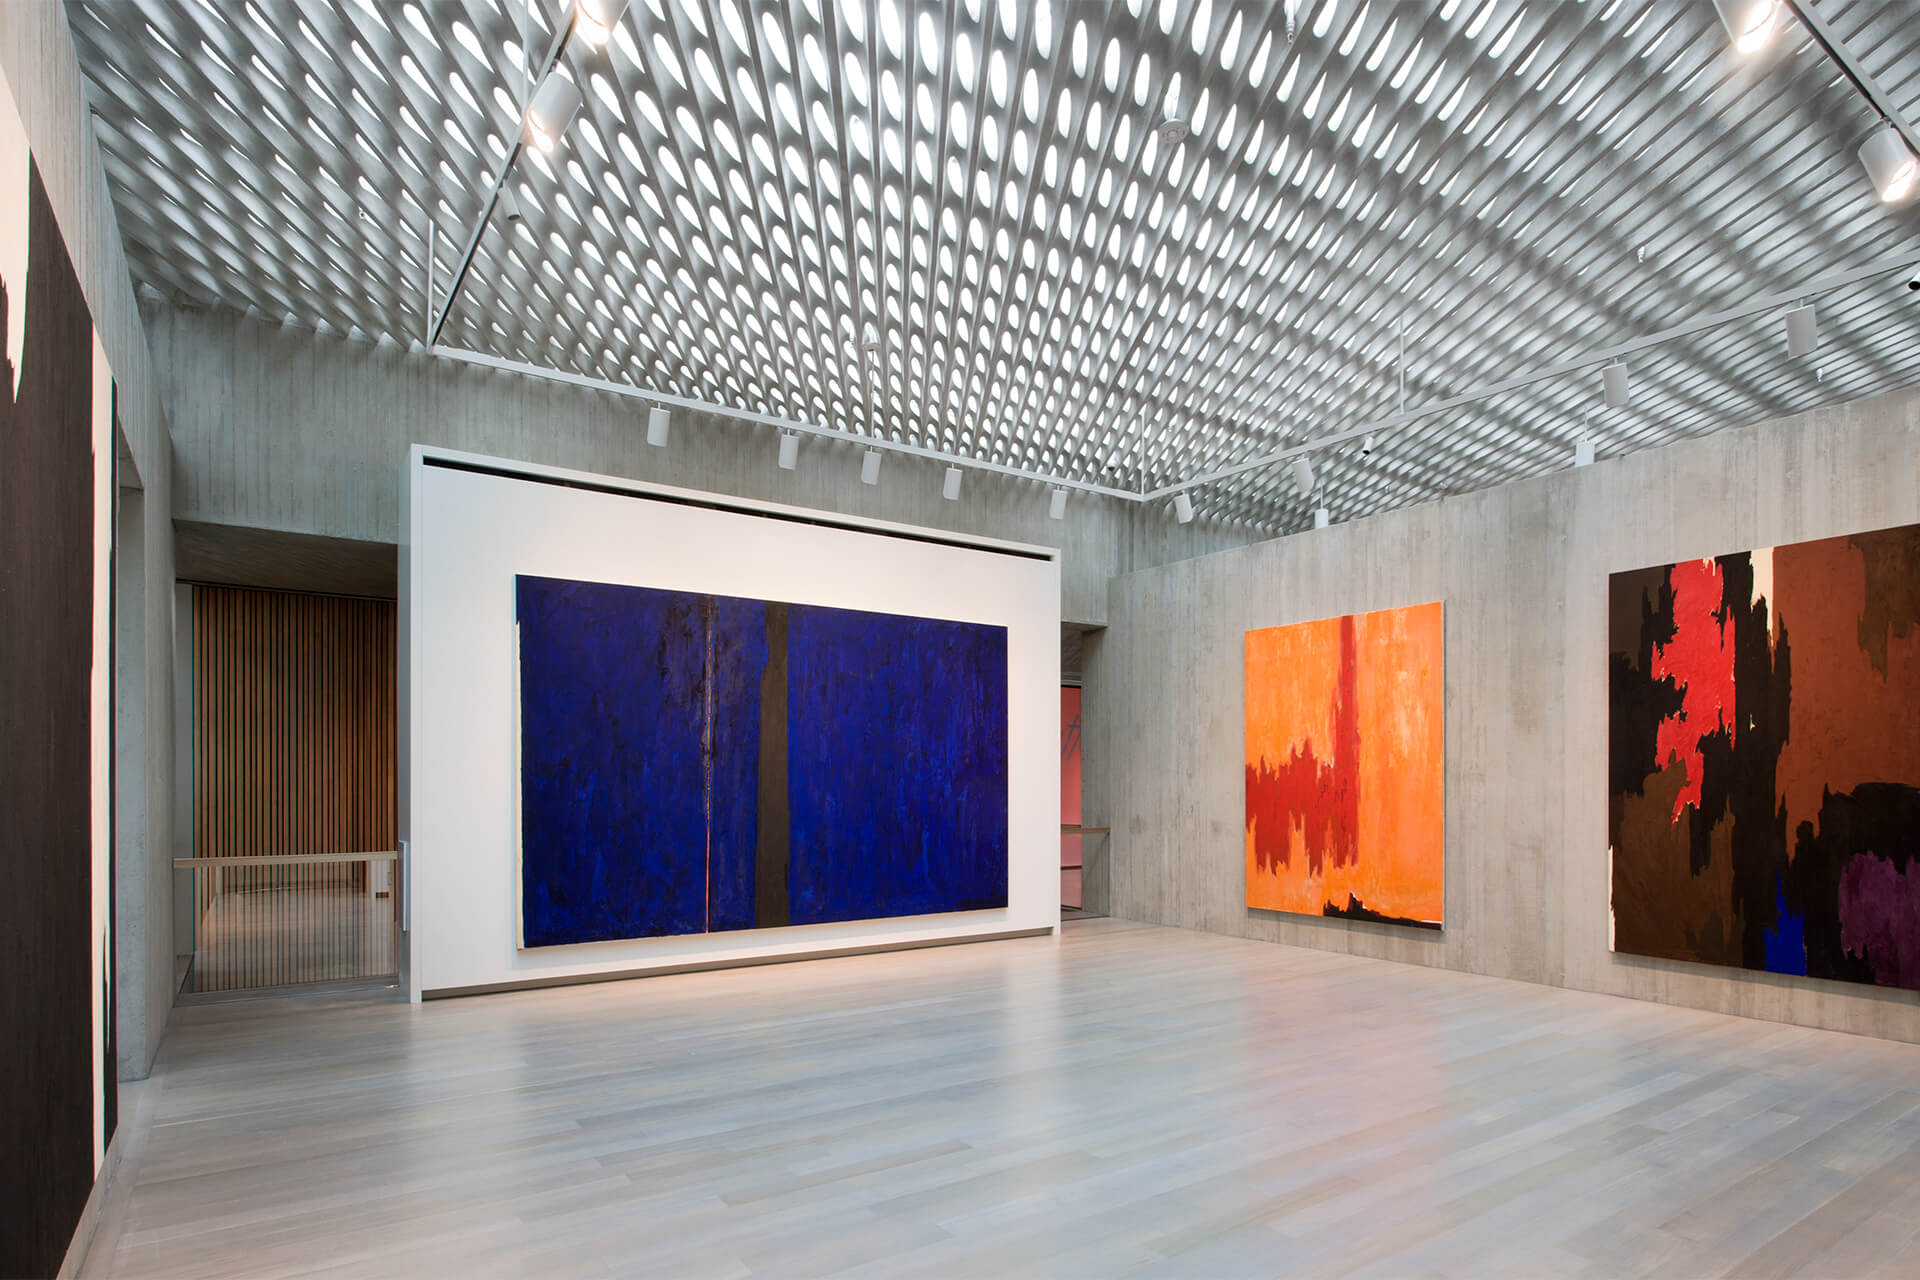 Gallery view at the Clyfford Still Museum